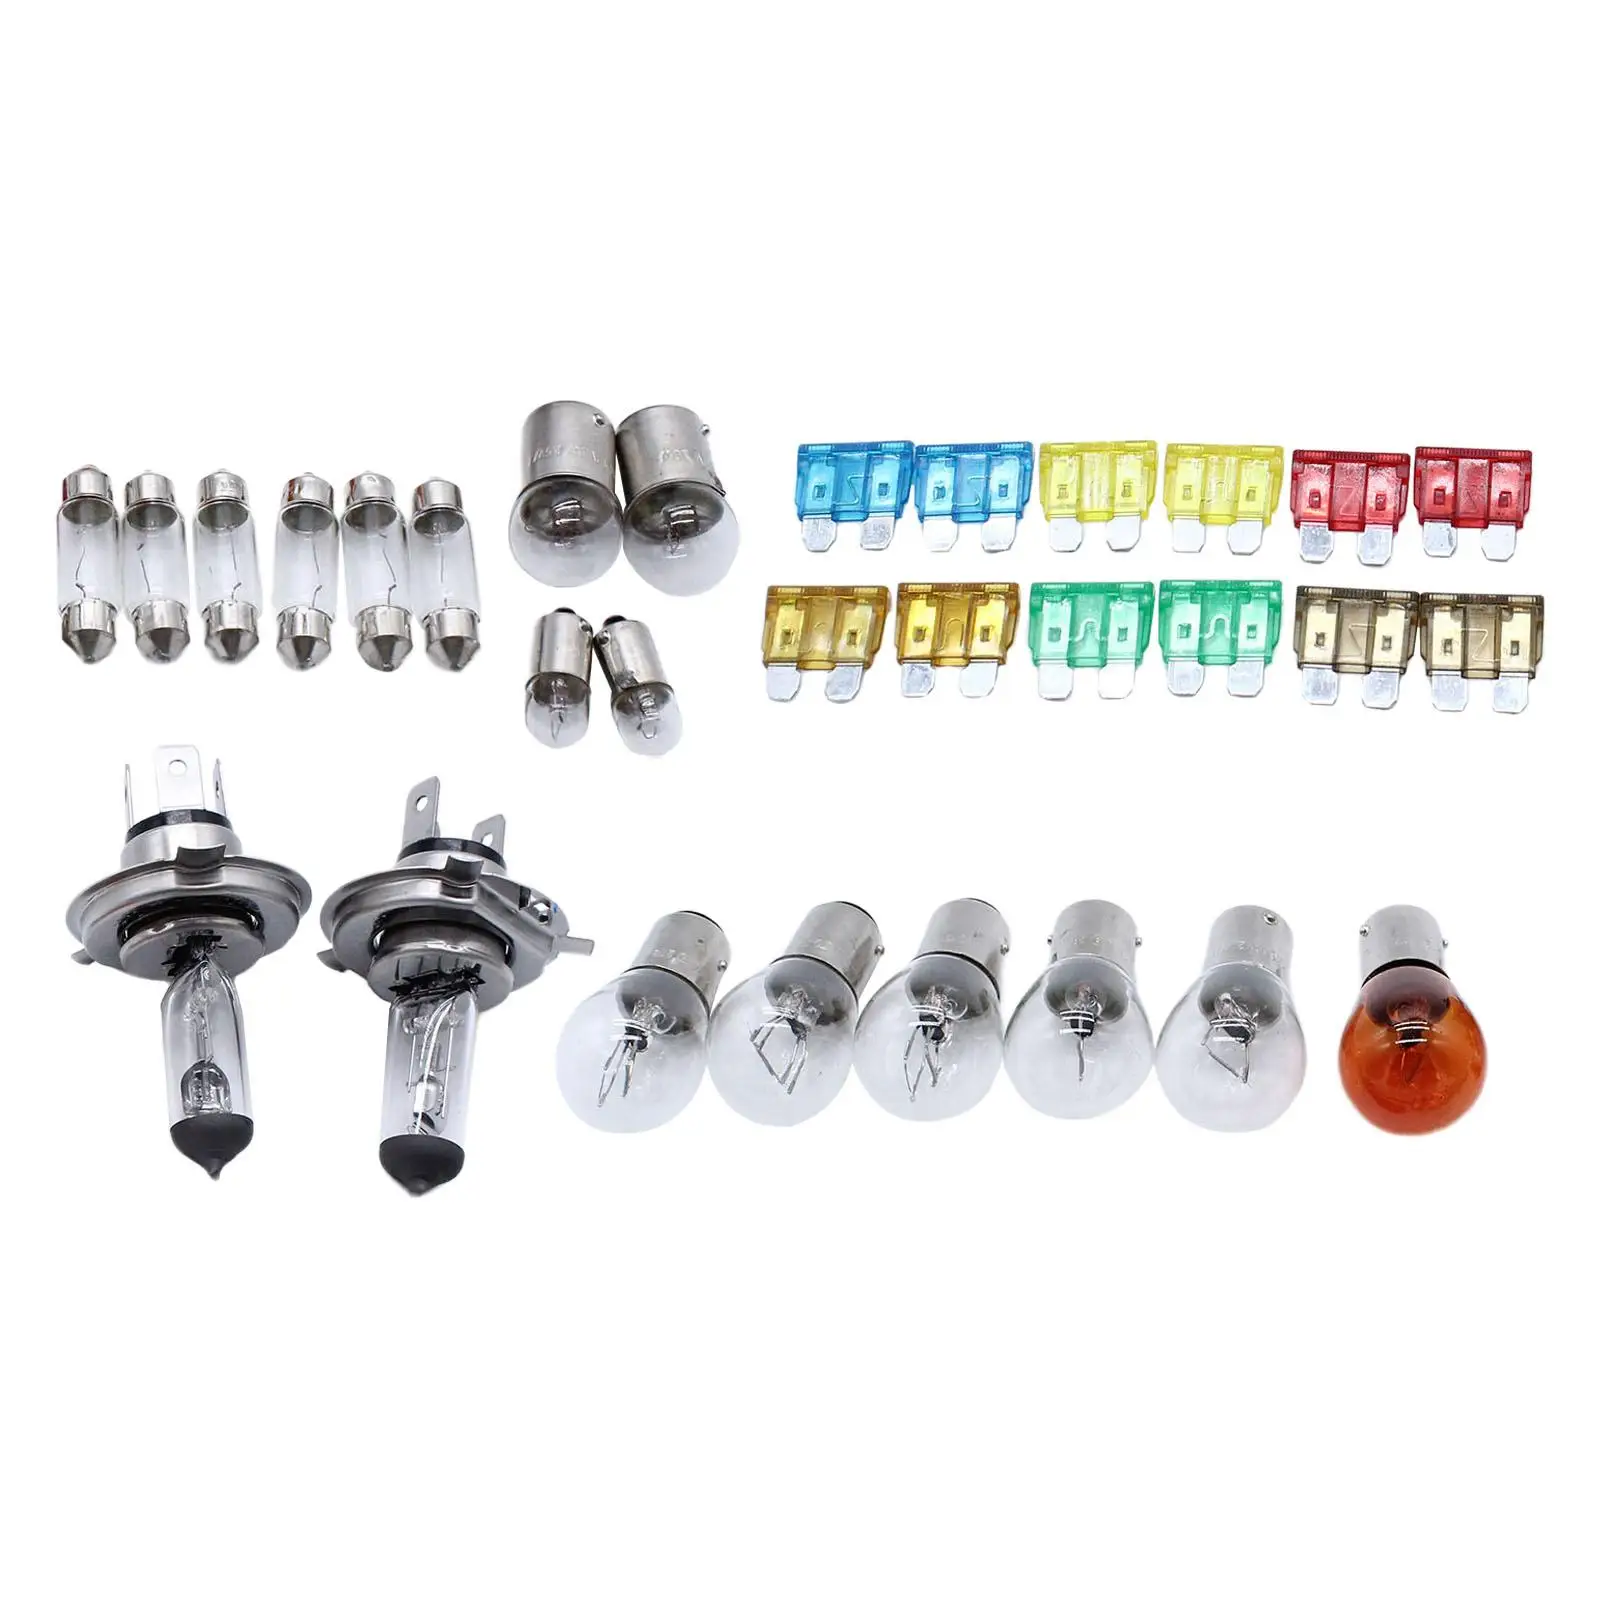 30Pcs H4 Light Bulb Set Emergency Fuse LED Head Light Lamp Replacement Super Bright Plug Play for Driving Motorcycle